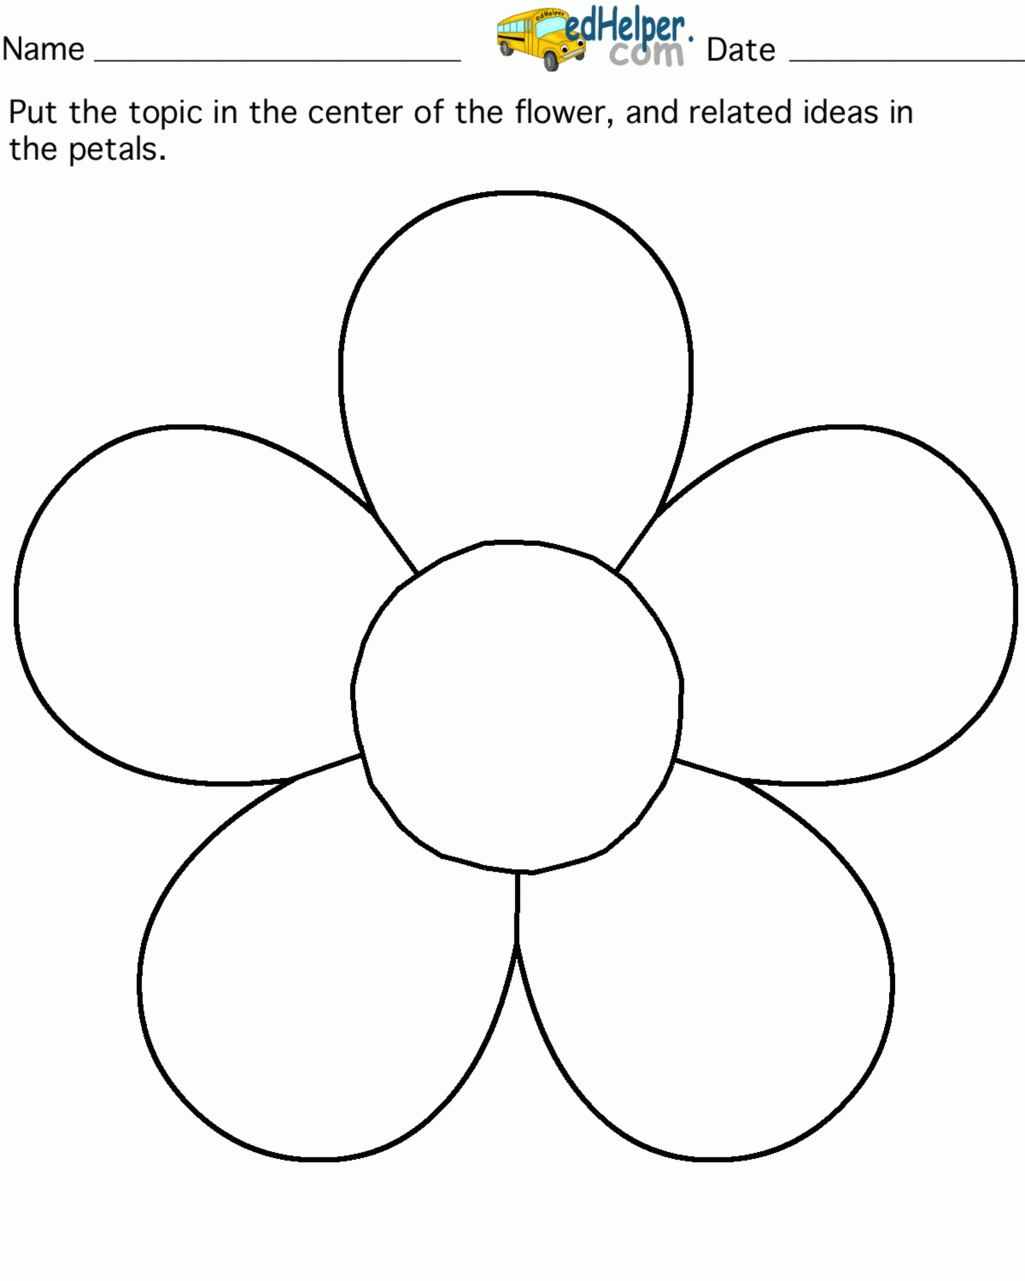 Free Coloring Pages Of Flower Petal Flowers With Petals Coloring